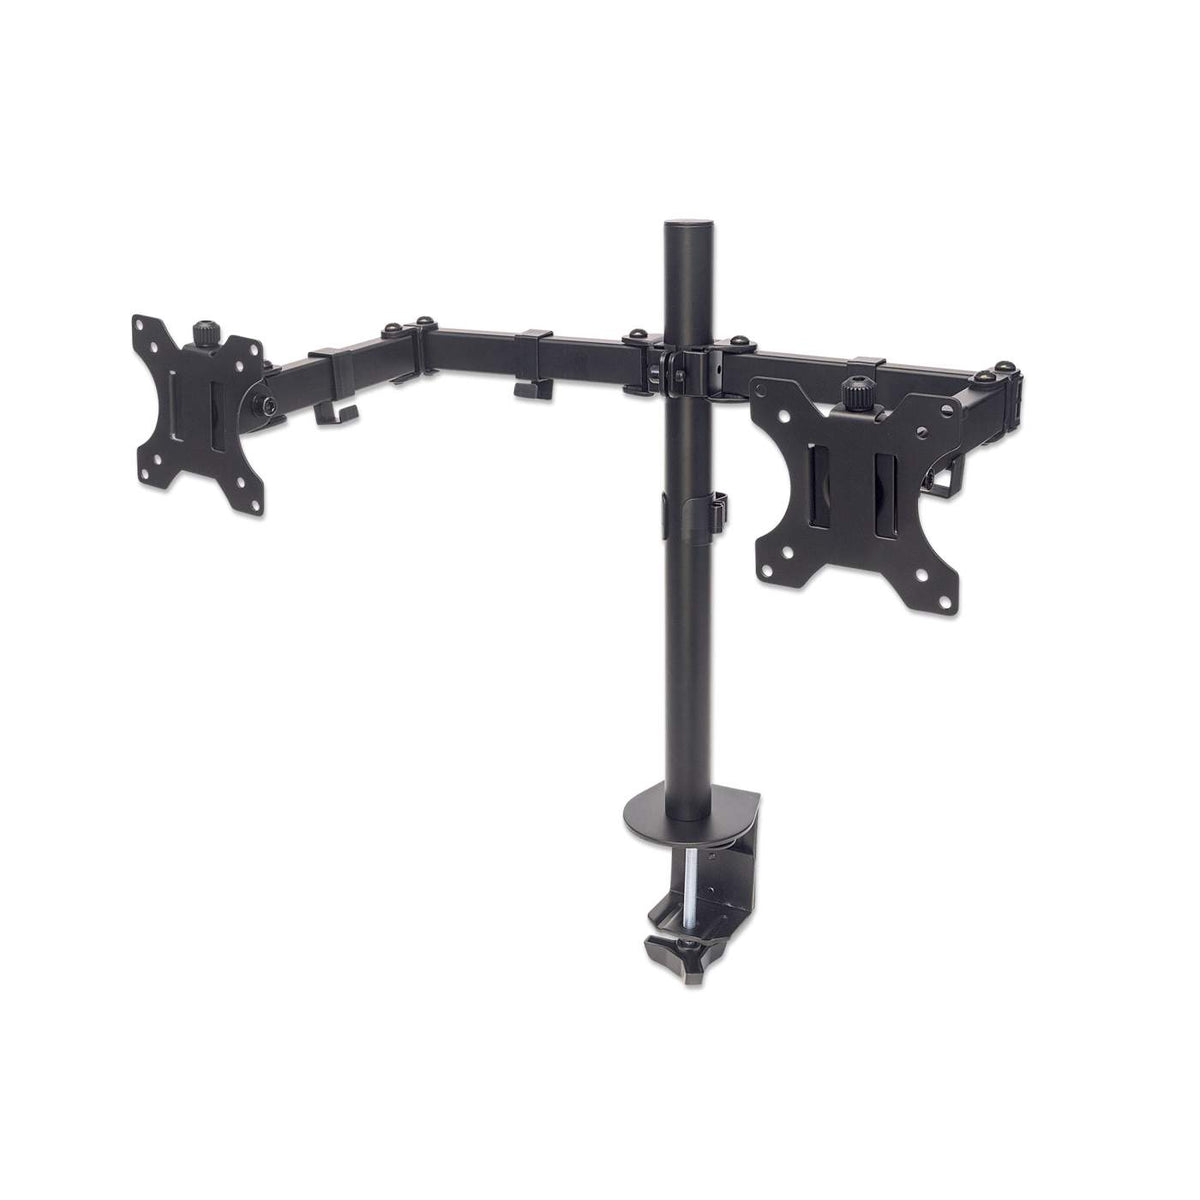 http://manhattanproducts.de/cdn/shop/products/universal-dual-monitor-mount-with-double-link-swing-arms-461528-1_1200x1200.jpg?v=1679617461